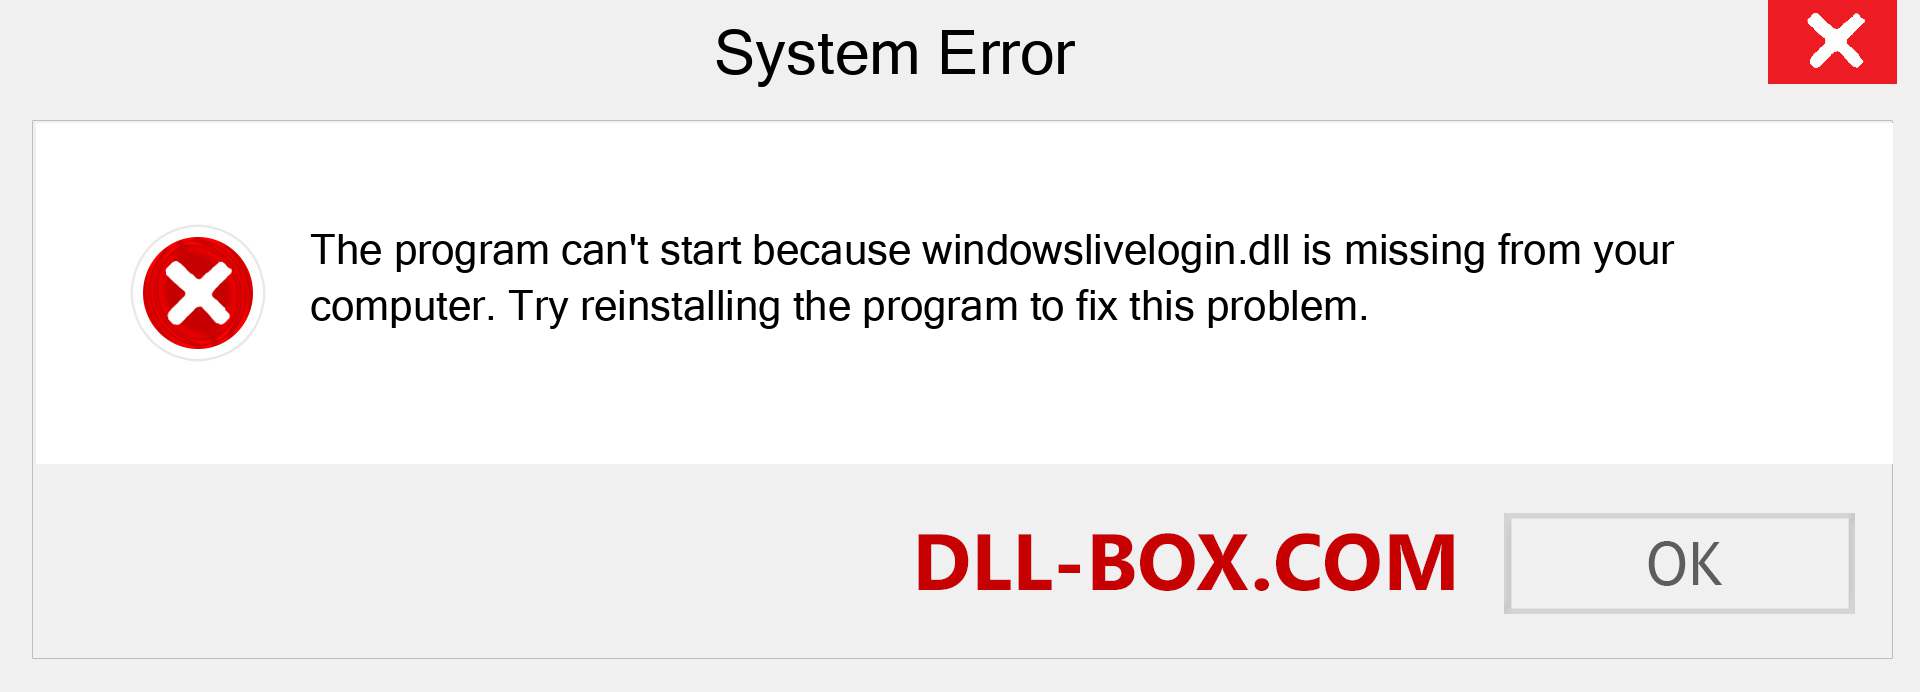  windowslivelogin.dll file is missing?. Download for Windows 7, 8, 10 - Fix  windowslivelogin dll Missing Error on Windows, photos, images